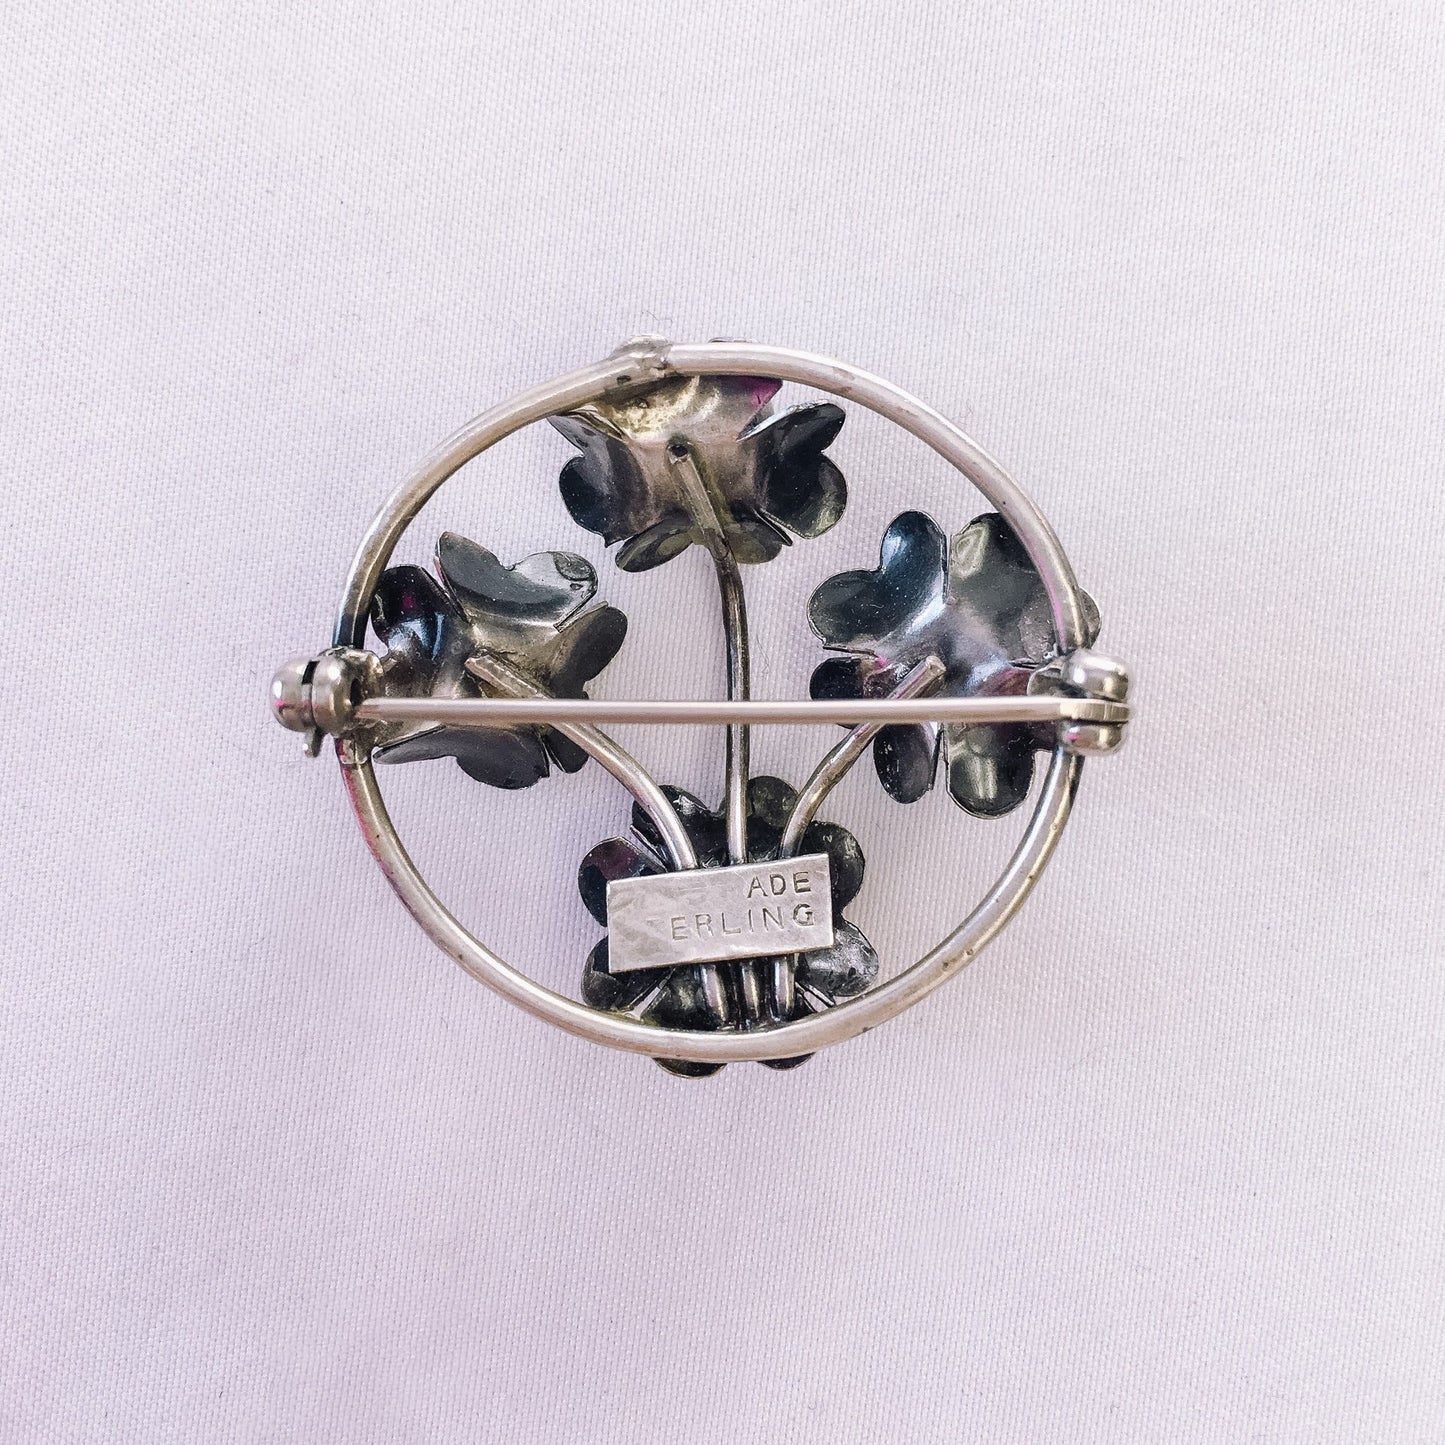 Vintage Sterling Flower Pin, Simple Sterling Pin, Possibly Scandinavian